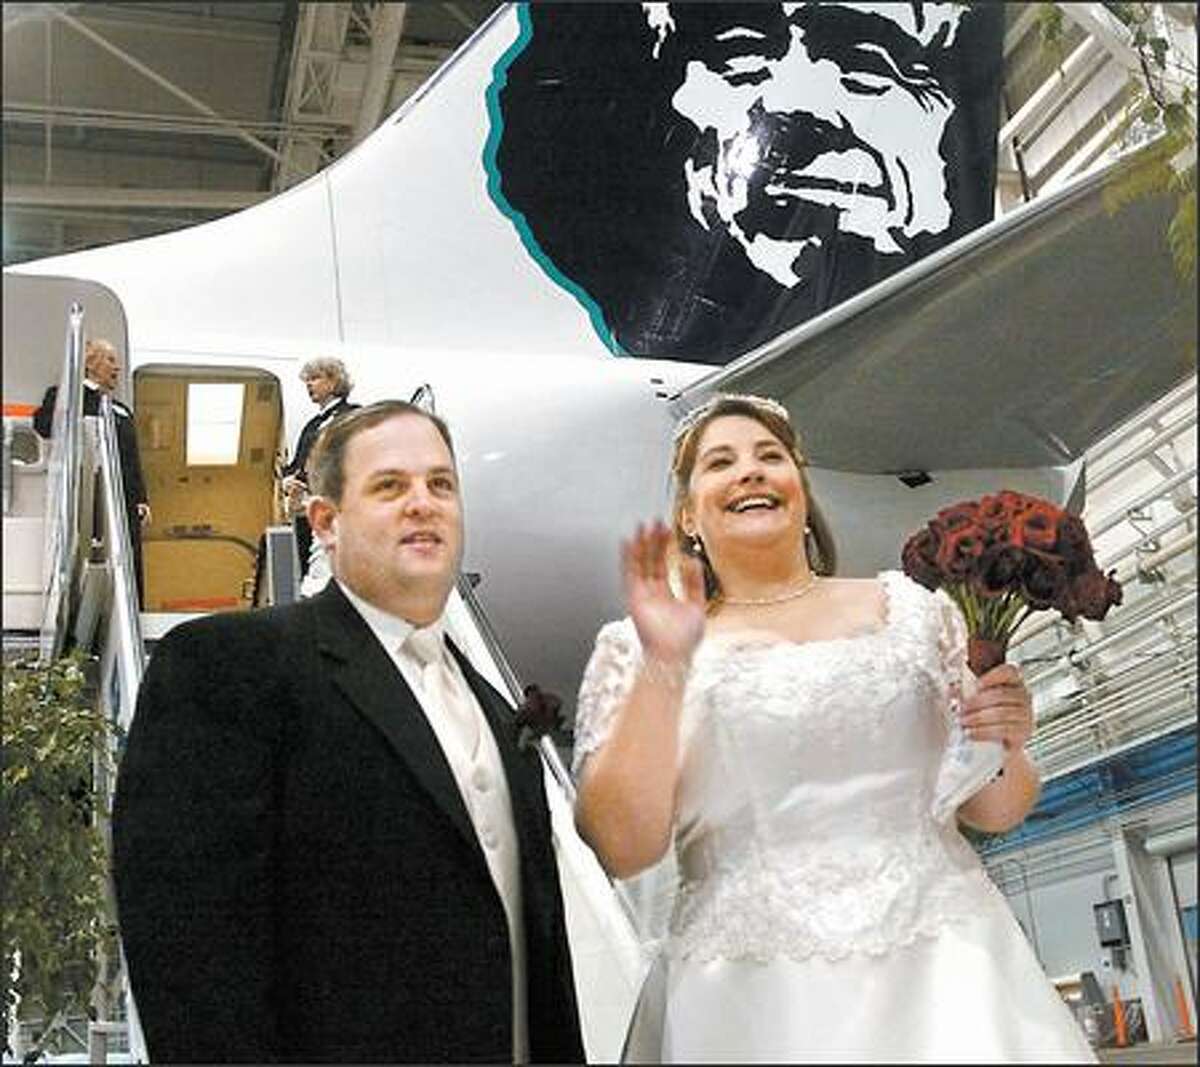 Alaska Airlines celebrated the delivery of its newest airplane, a Boeing 737-800, yesterday with an onboard wedding with employees Frank Raymond and Jennifer Genna. The plane departed from Boeing Field and touched down at Sea-Tac Airport. Raymond and Genna, shown here before boarding the airplane, planned to tie the knot over Mt. Rainier. Captain Mike Swanigan was the ceremony officiant, according to the couple’s wedding invitation. The card shows an Alaska Airlines jet flying through a heart made of red balloons.